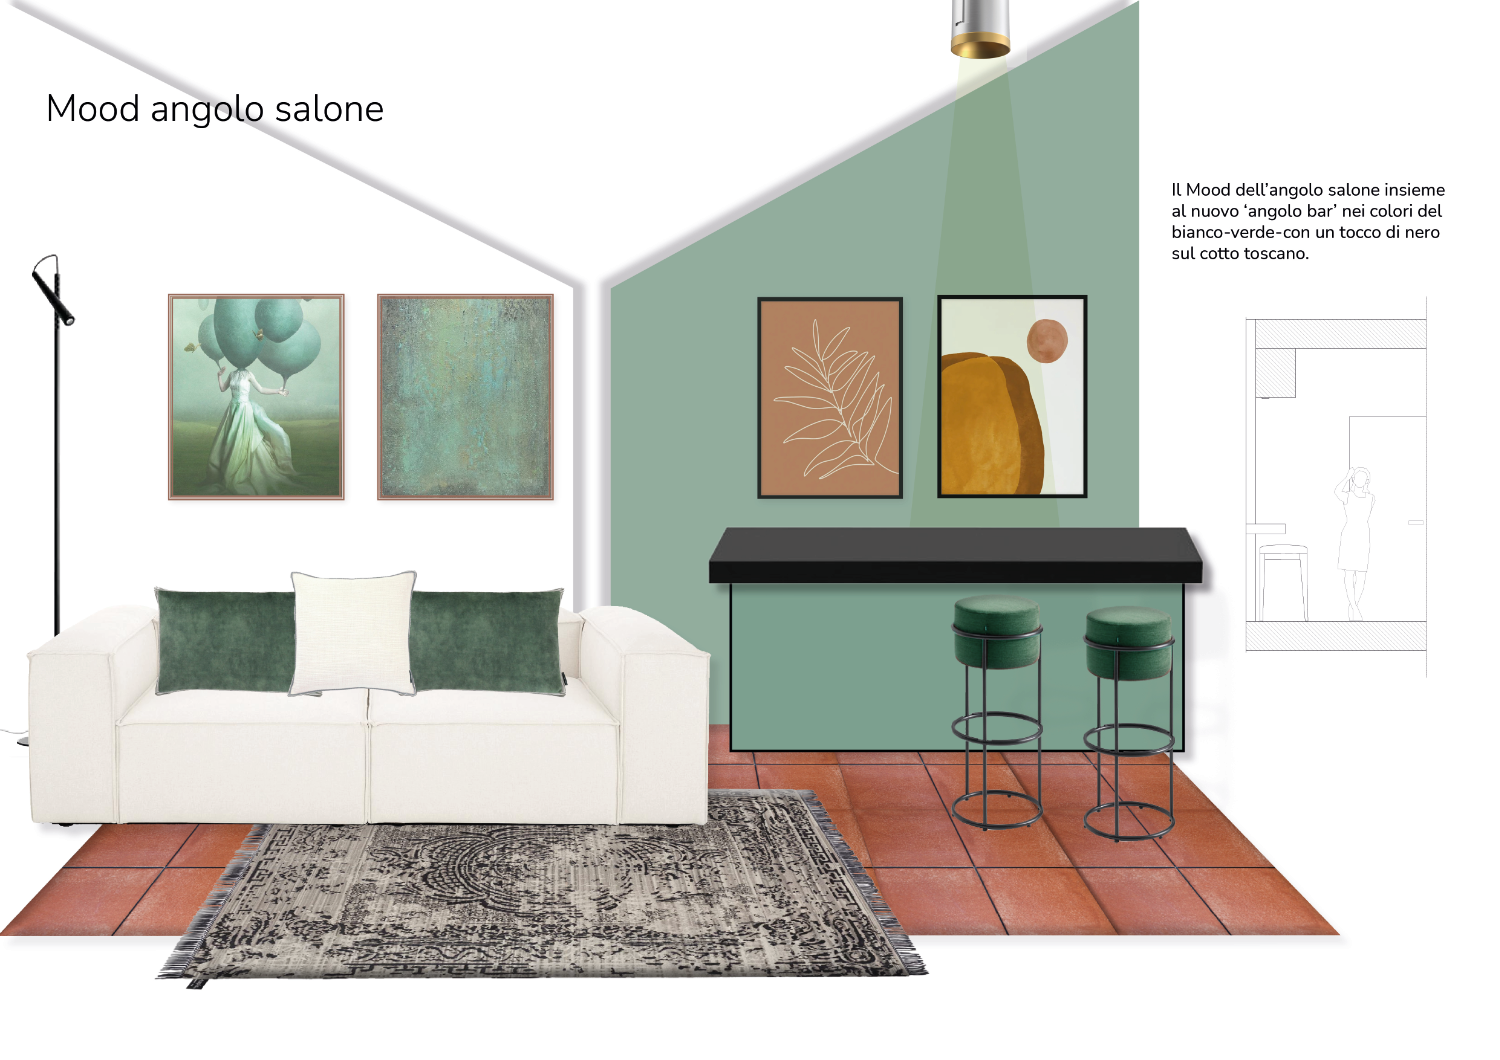 Visualisation of the atmosphere of the colours, materials and furniture by Elles Interior Design.